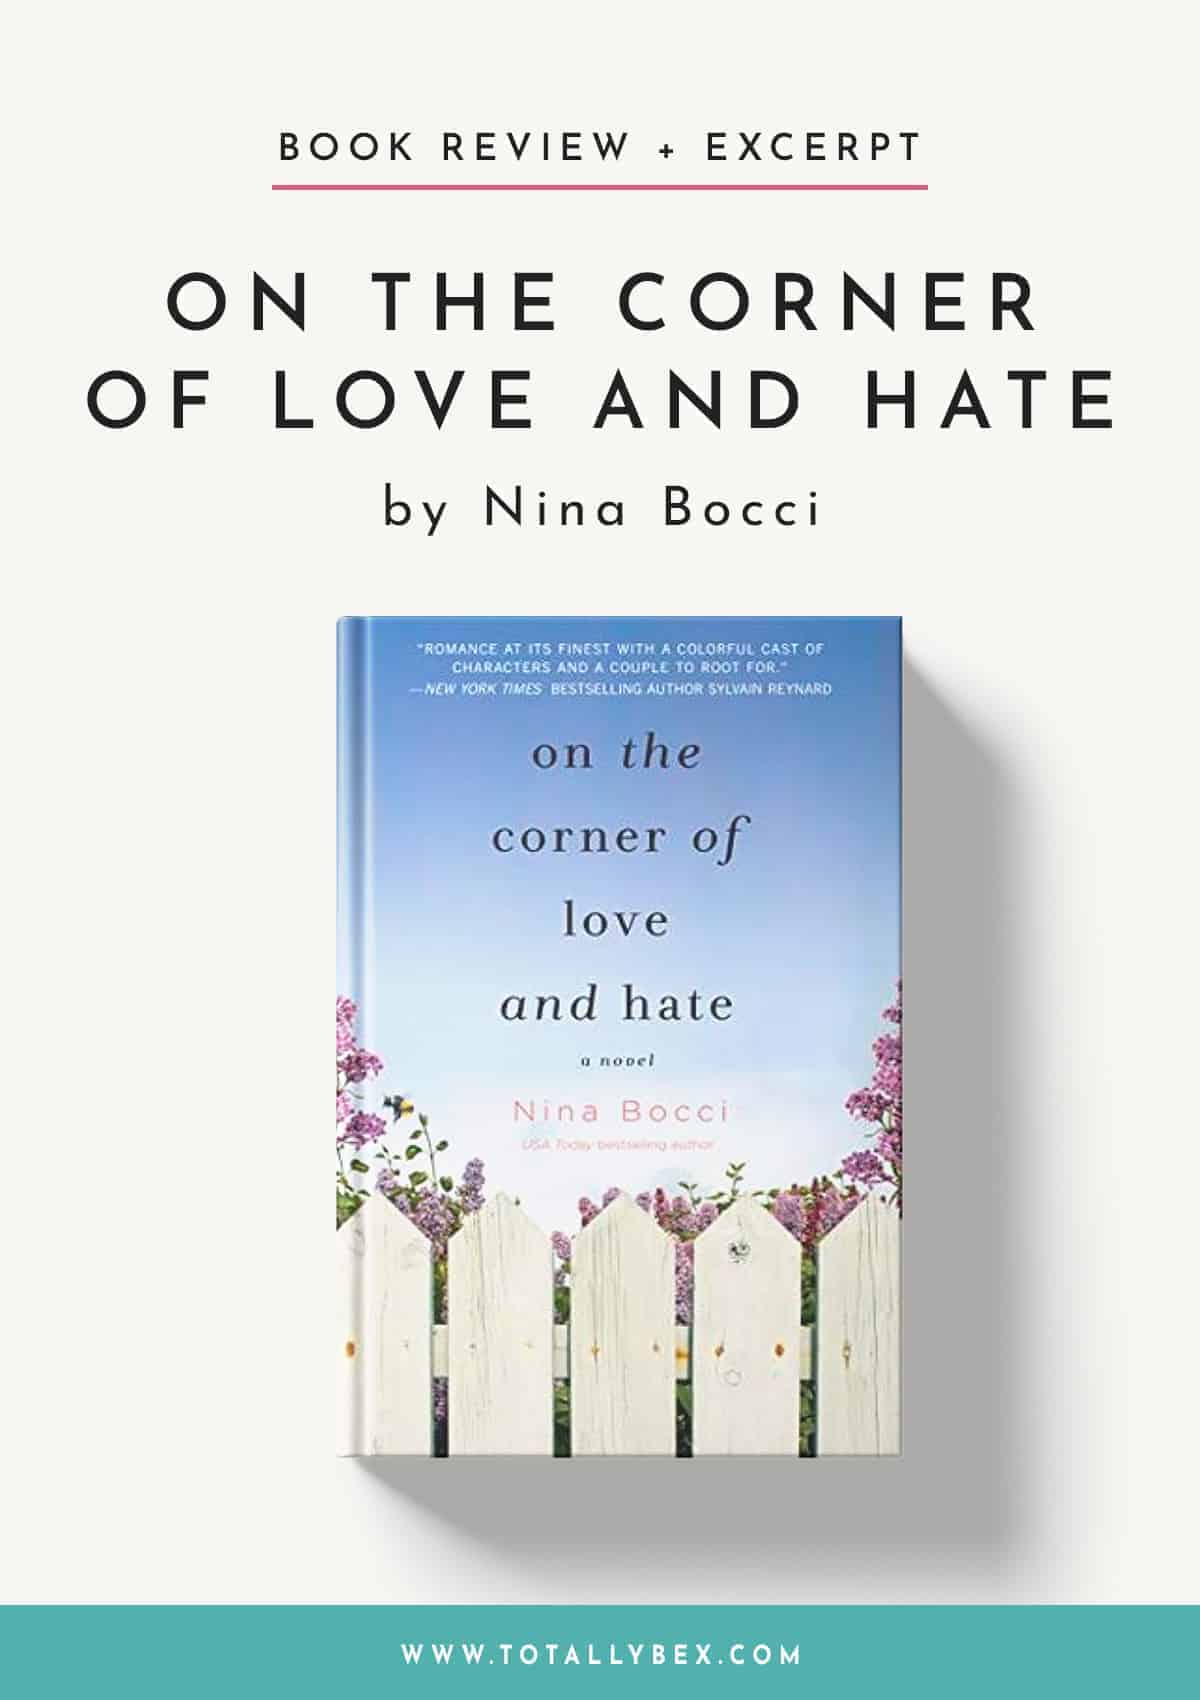 On the Corner of Love and Hate by Nina Bocci – Small-Town Romance, Big on Personality